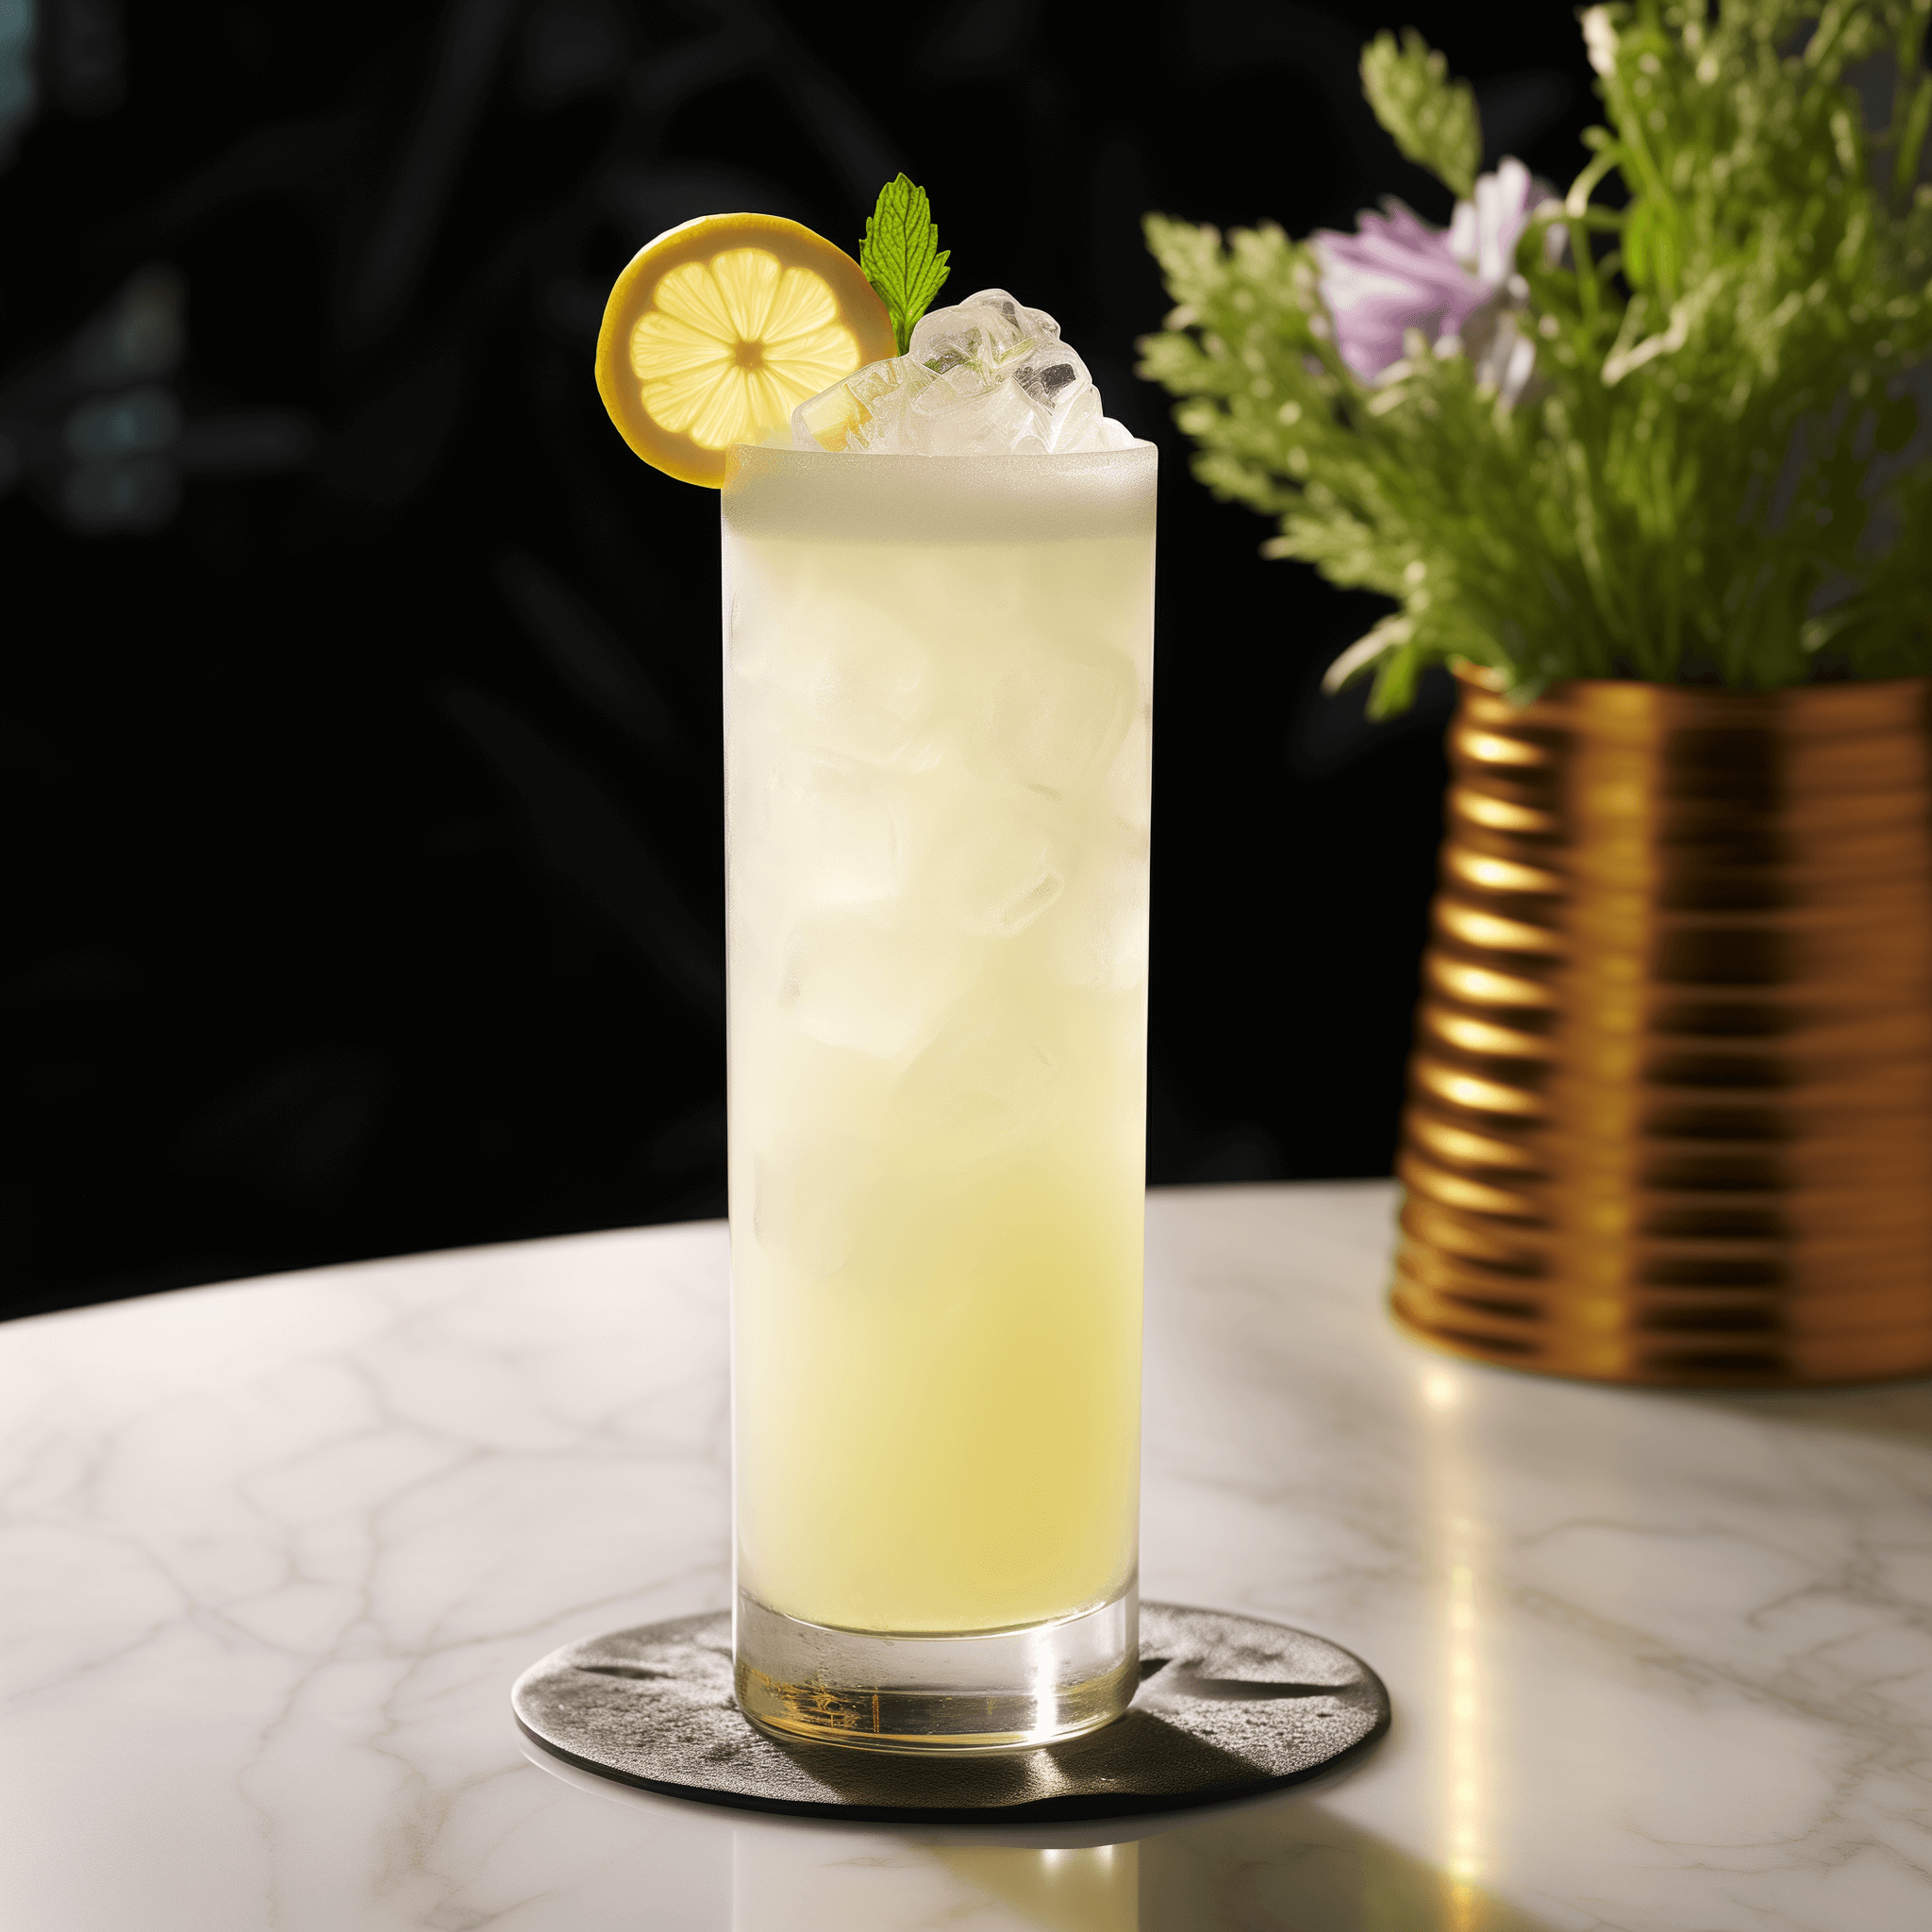 Cream Fizz Cocktail Recipe - The Cream Fizz is a velvety, smooth, and creamy cocktail with a hint of citrus and a subtle sweetness. The combination of gin, lemon juice, and cream creates a harmonious balance of flavors, while the carbonation from the soda water adds a refreshing and effervescent touch.